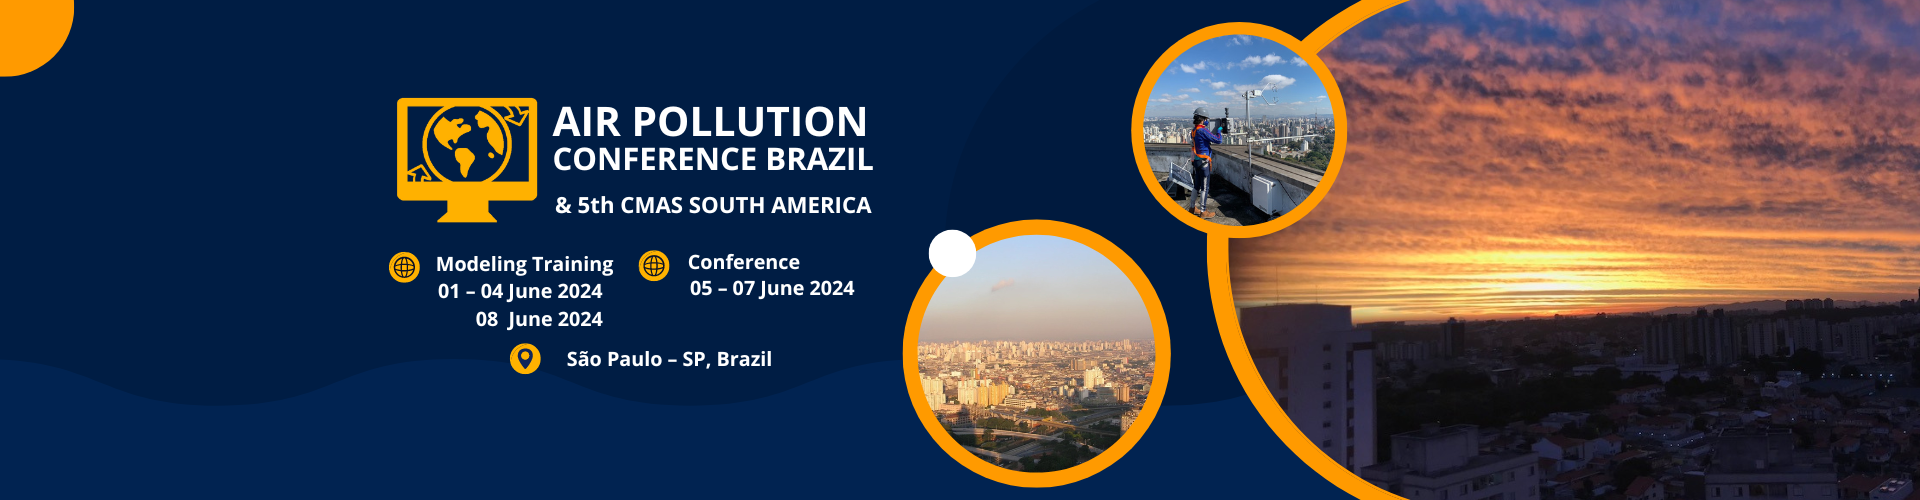 Air Pollution Conference Brazil and 5th Cmas South America